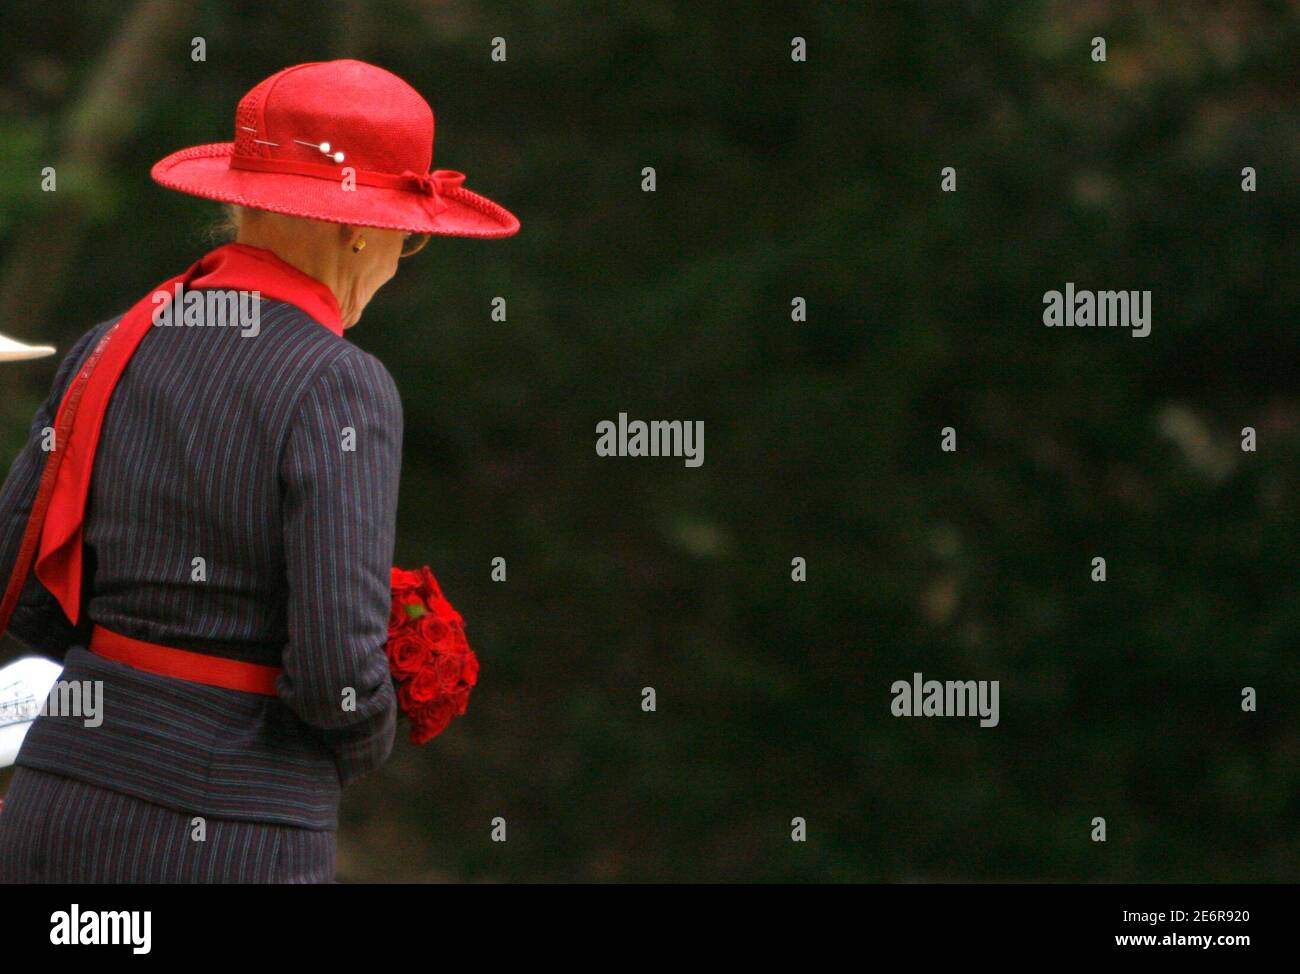 Denmark's Queen Margrethe II walks at the Biwon garden in the Changdeokgung palace in Seoul October 10, 2007. REUTERS/Lee Jae-Won (SOUTH KOREA) Stock Photo